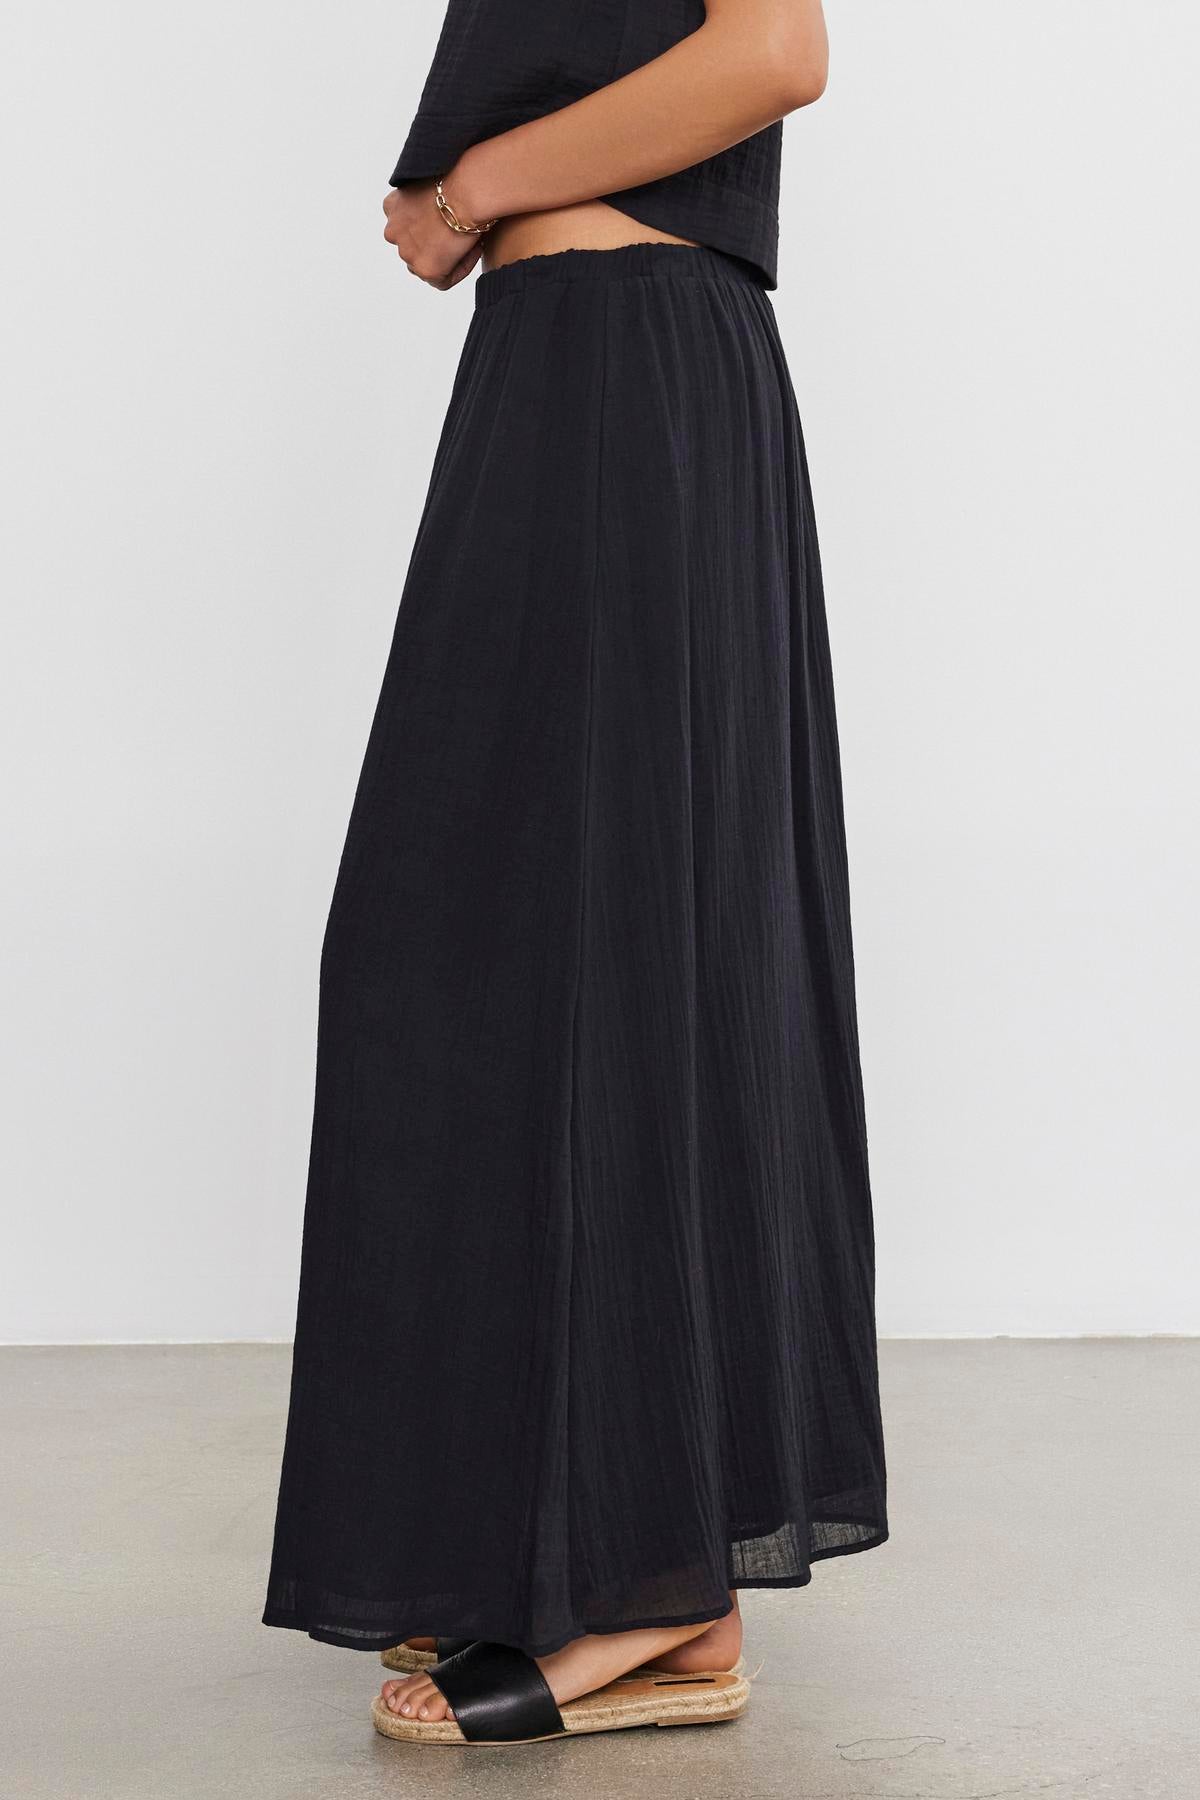 A woman standing in profile wearing a black crop top and a long, flowing INDY COTTON GAUZE SKIRT with sandals by Velvet by Graham & Spencer.-36910123188417